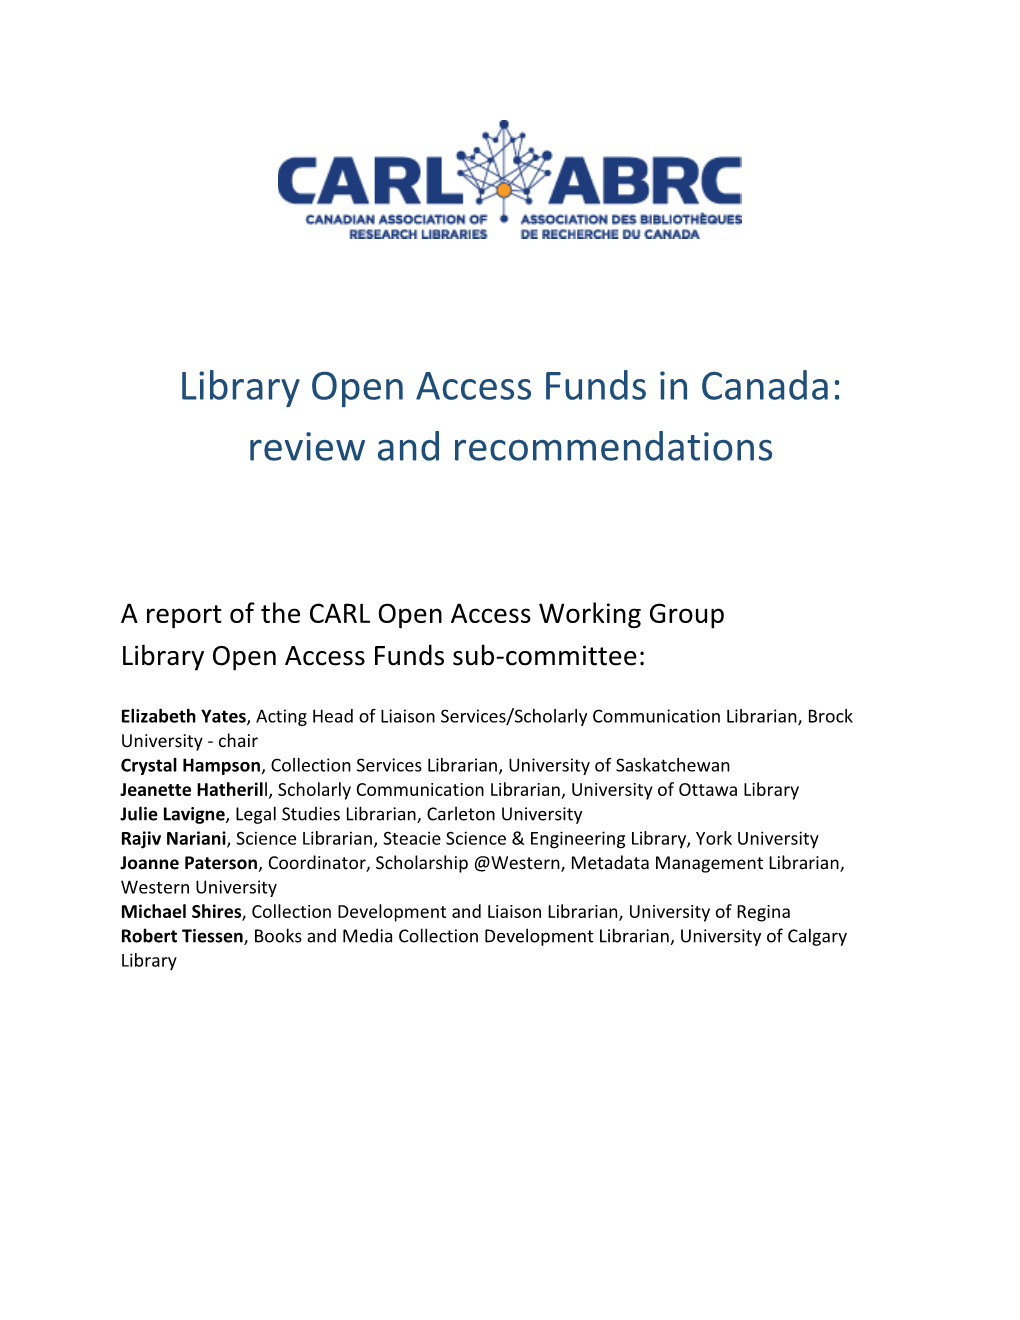 Library Open Access Funds in Canada: Review and Recommendations